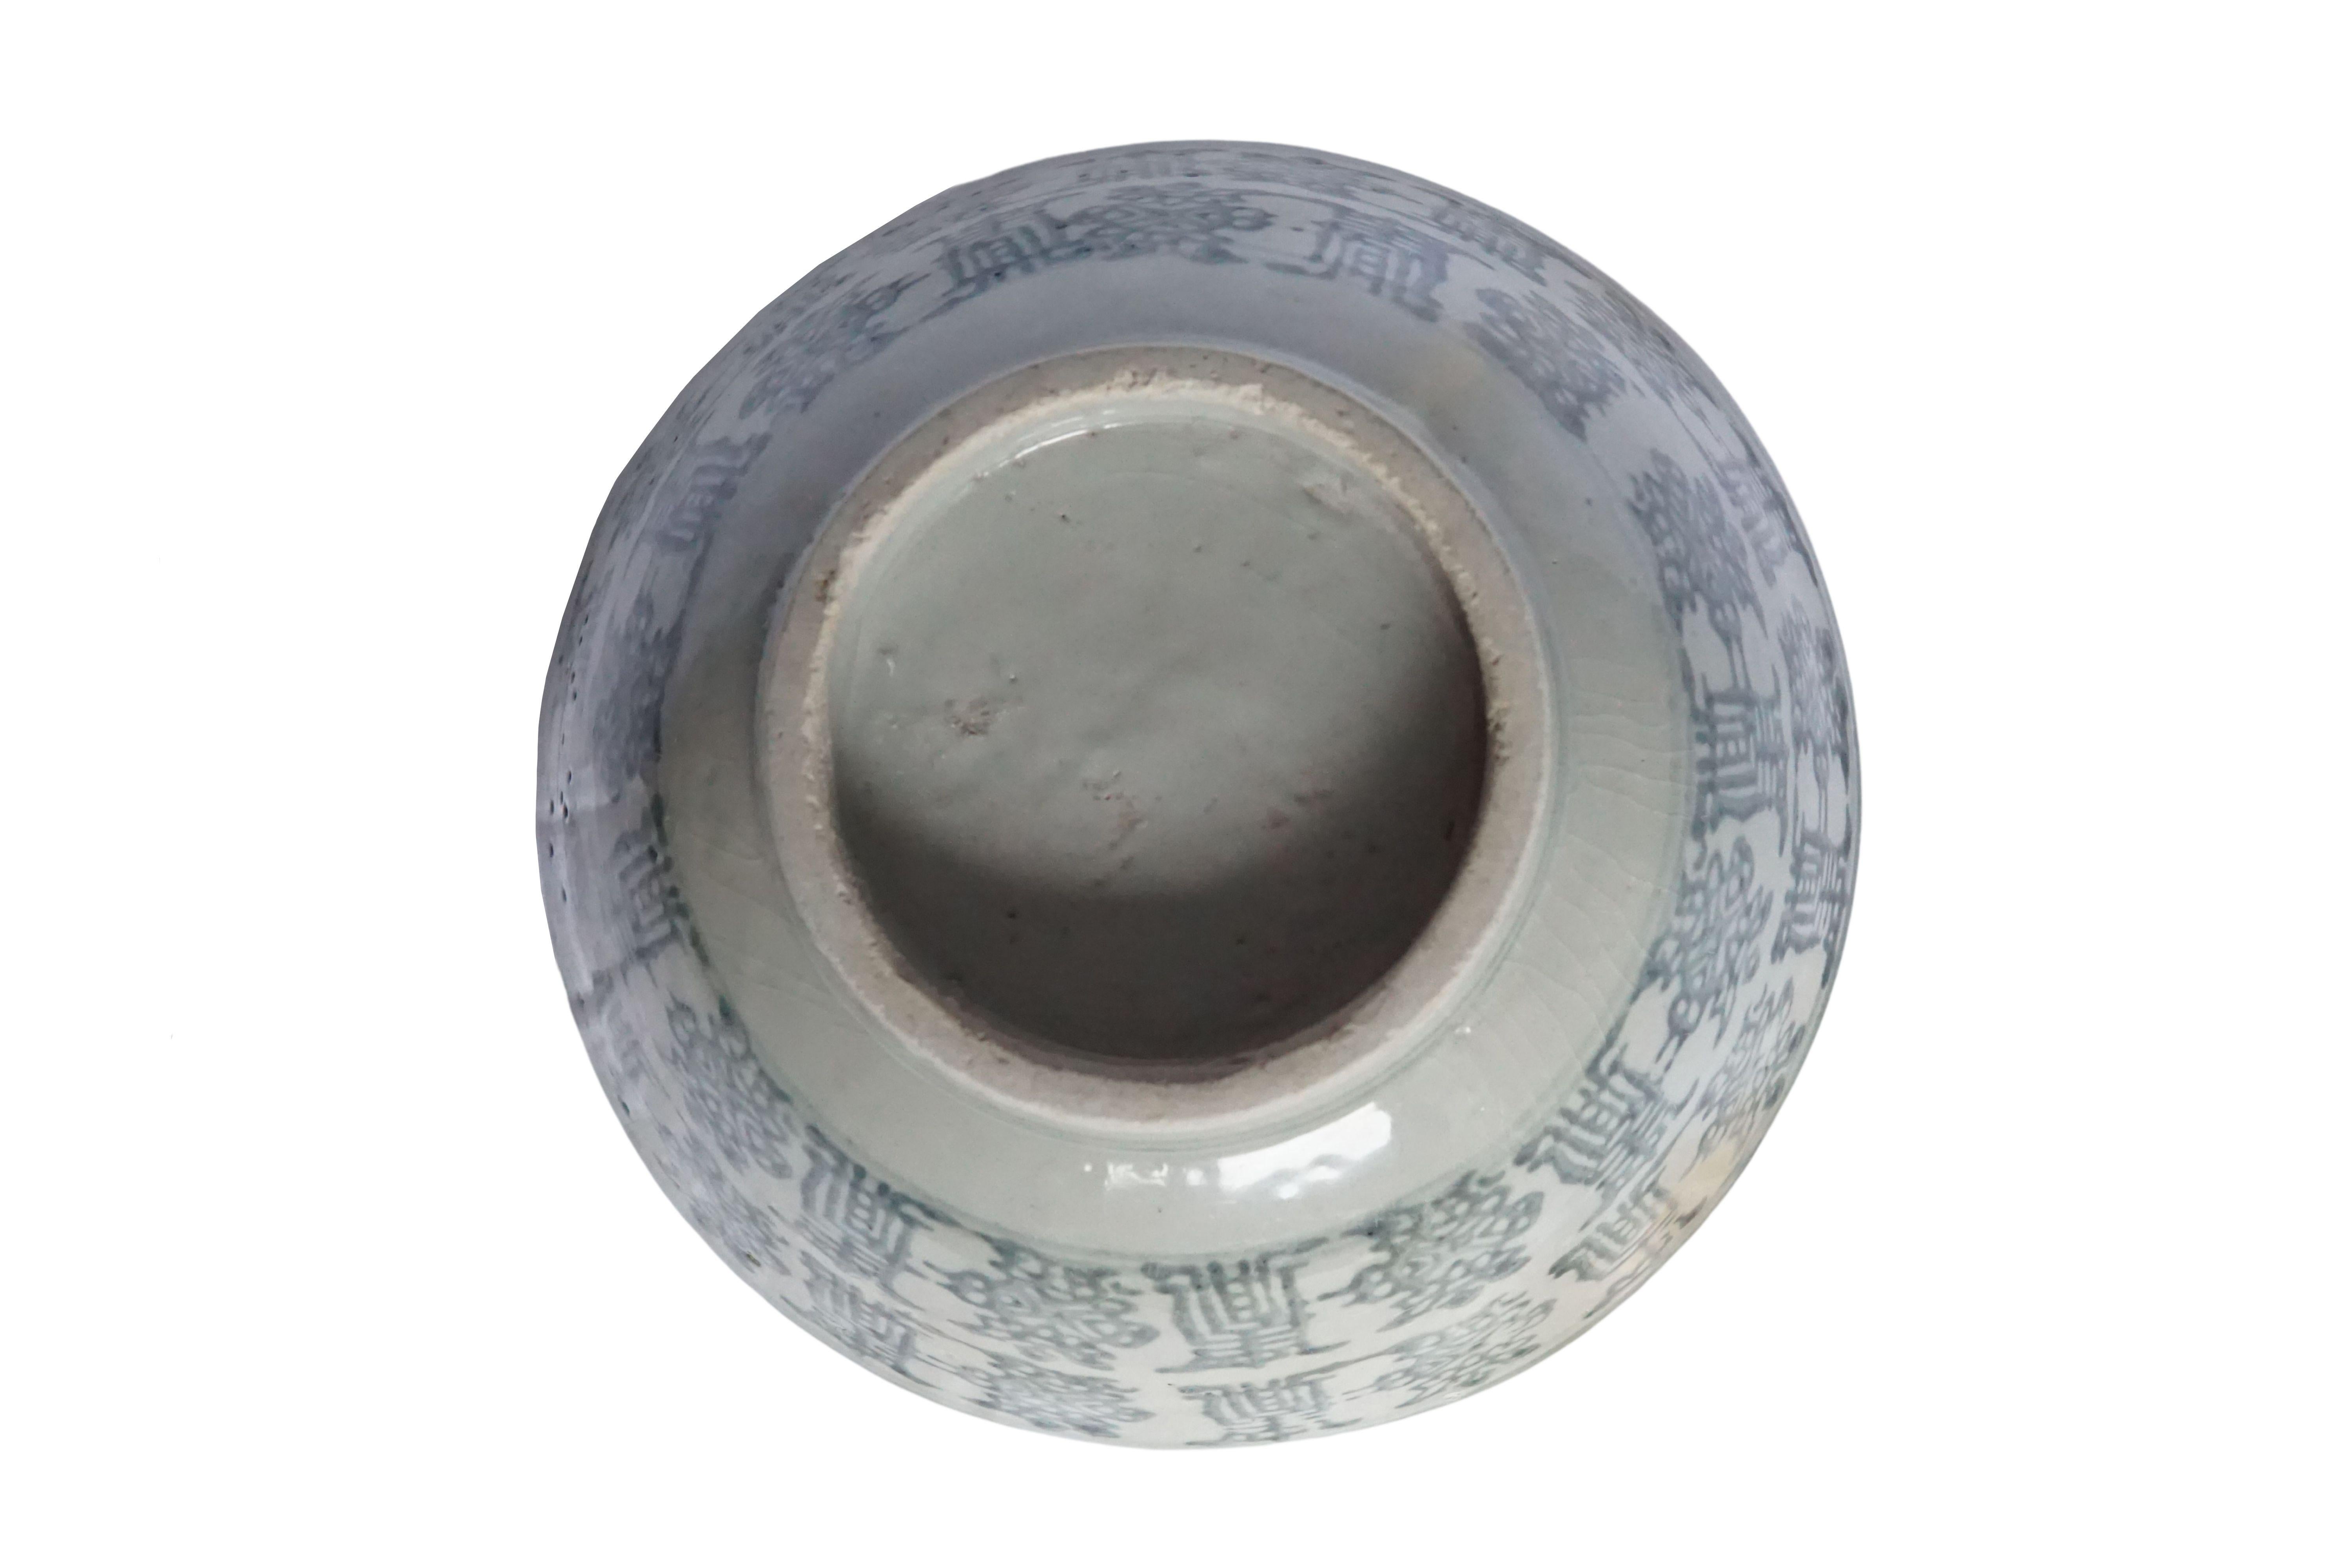 Glazed Chinese Blue & White Porcelain Bowl with Hand-Painted Symbols, Qing Dynasty For Sale